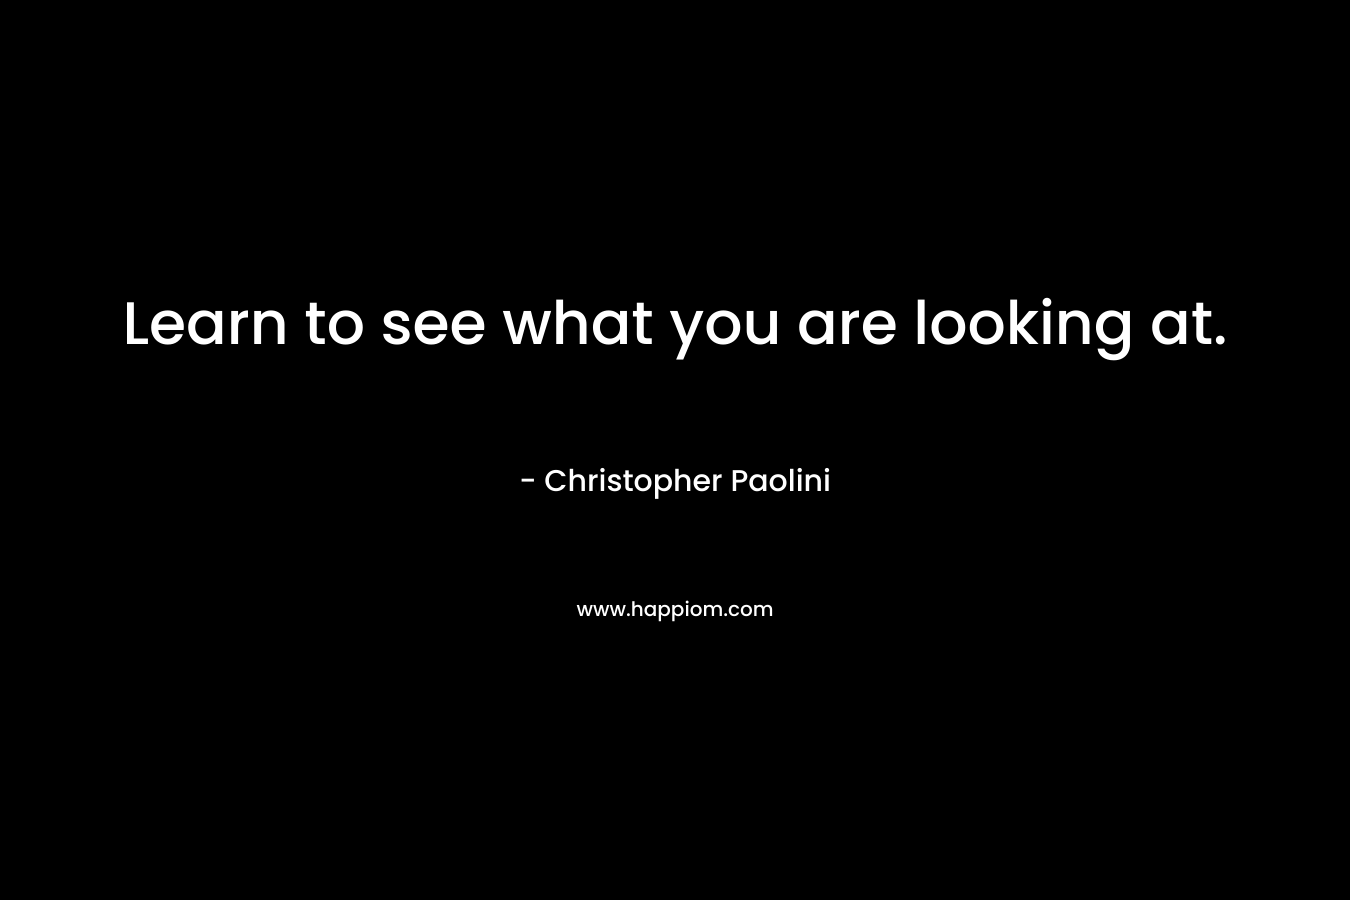 Learn to see what you are looking at.